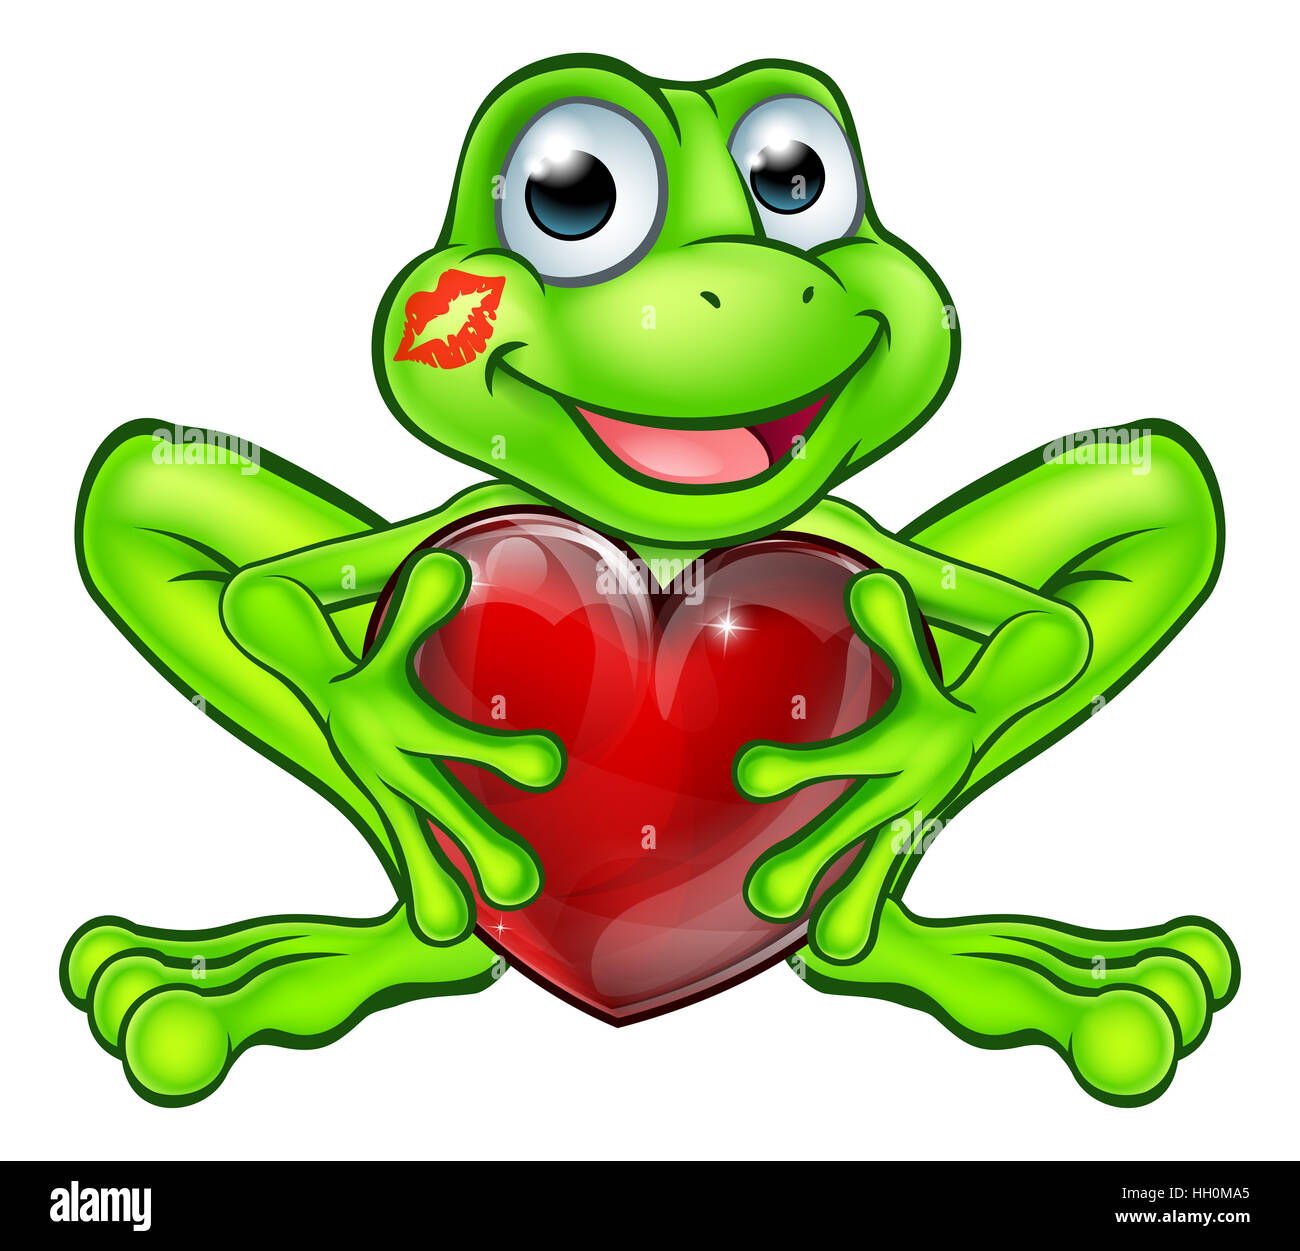 Cartoon frog fairy tale mascot character holding a heart shape with a lipstick kiss mark on his face Stock Photo